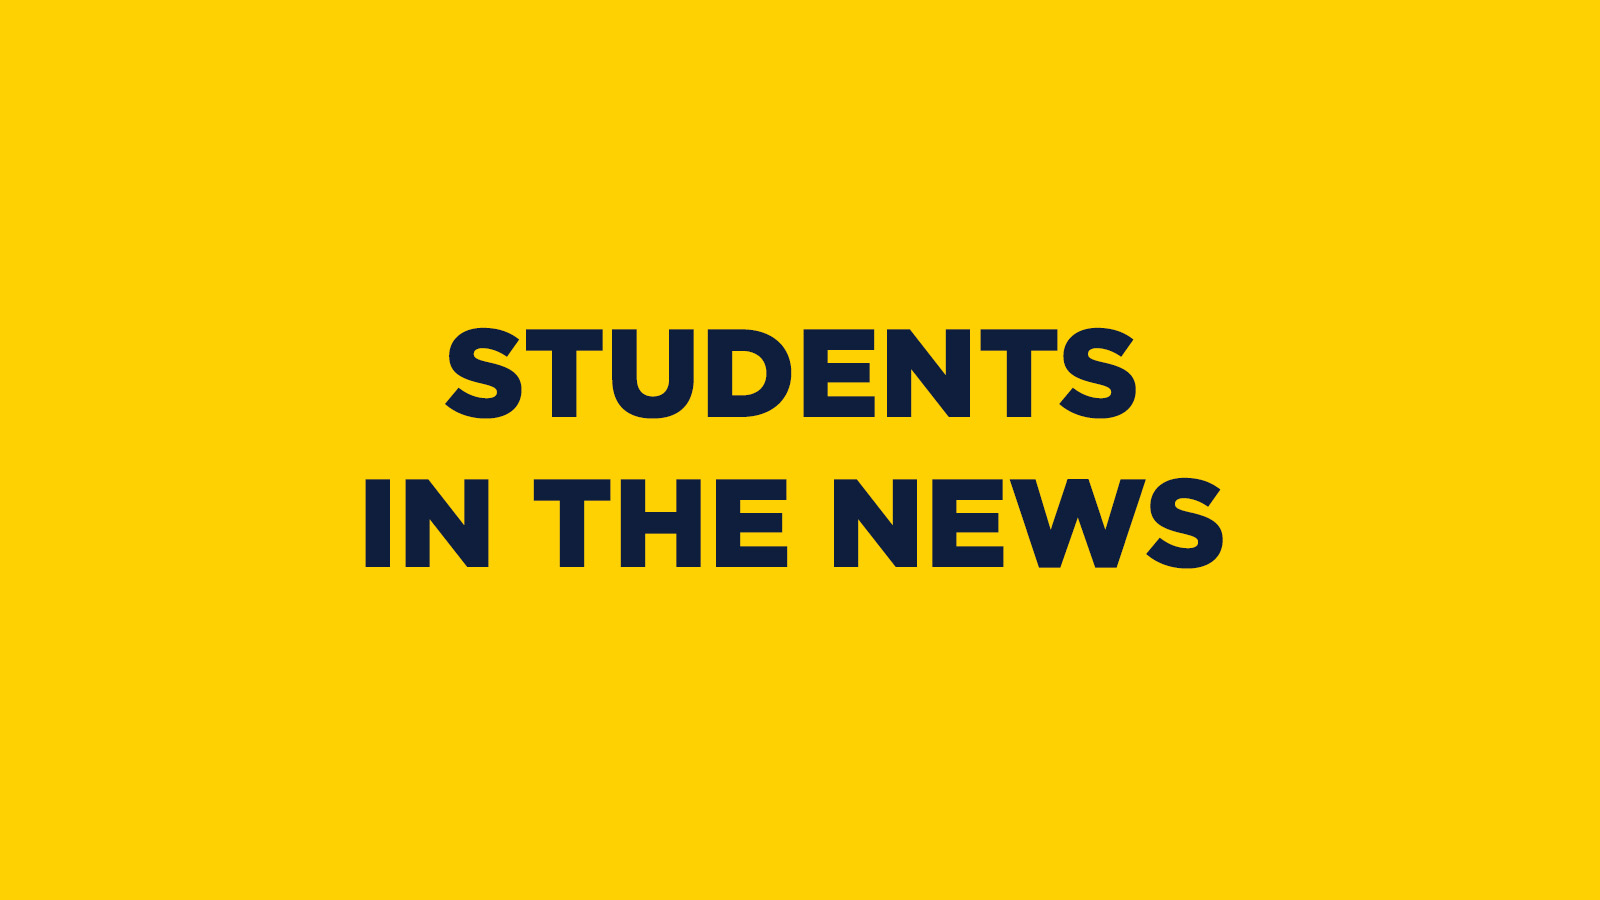 STUDENTS IN THE NEWS